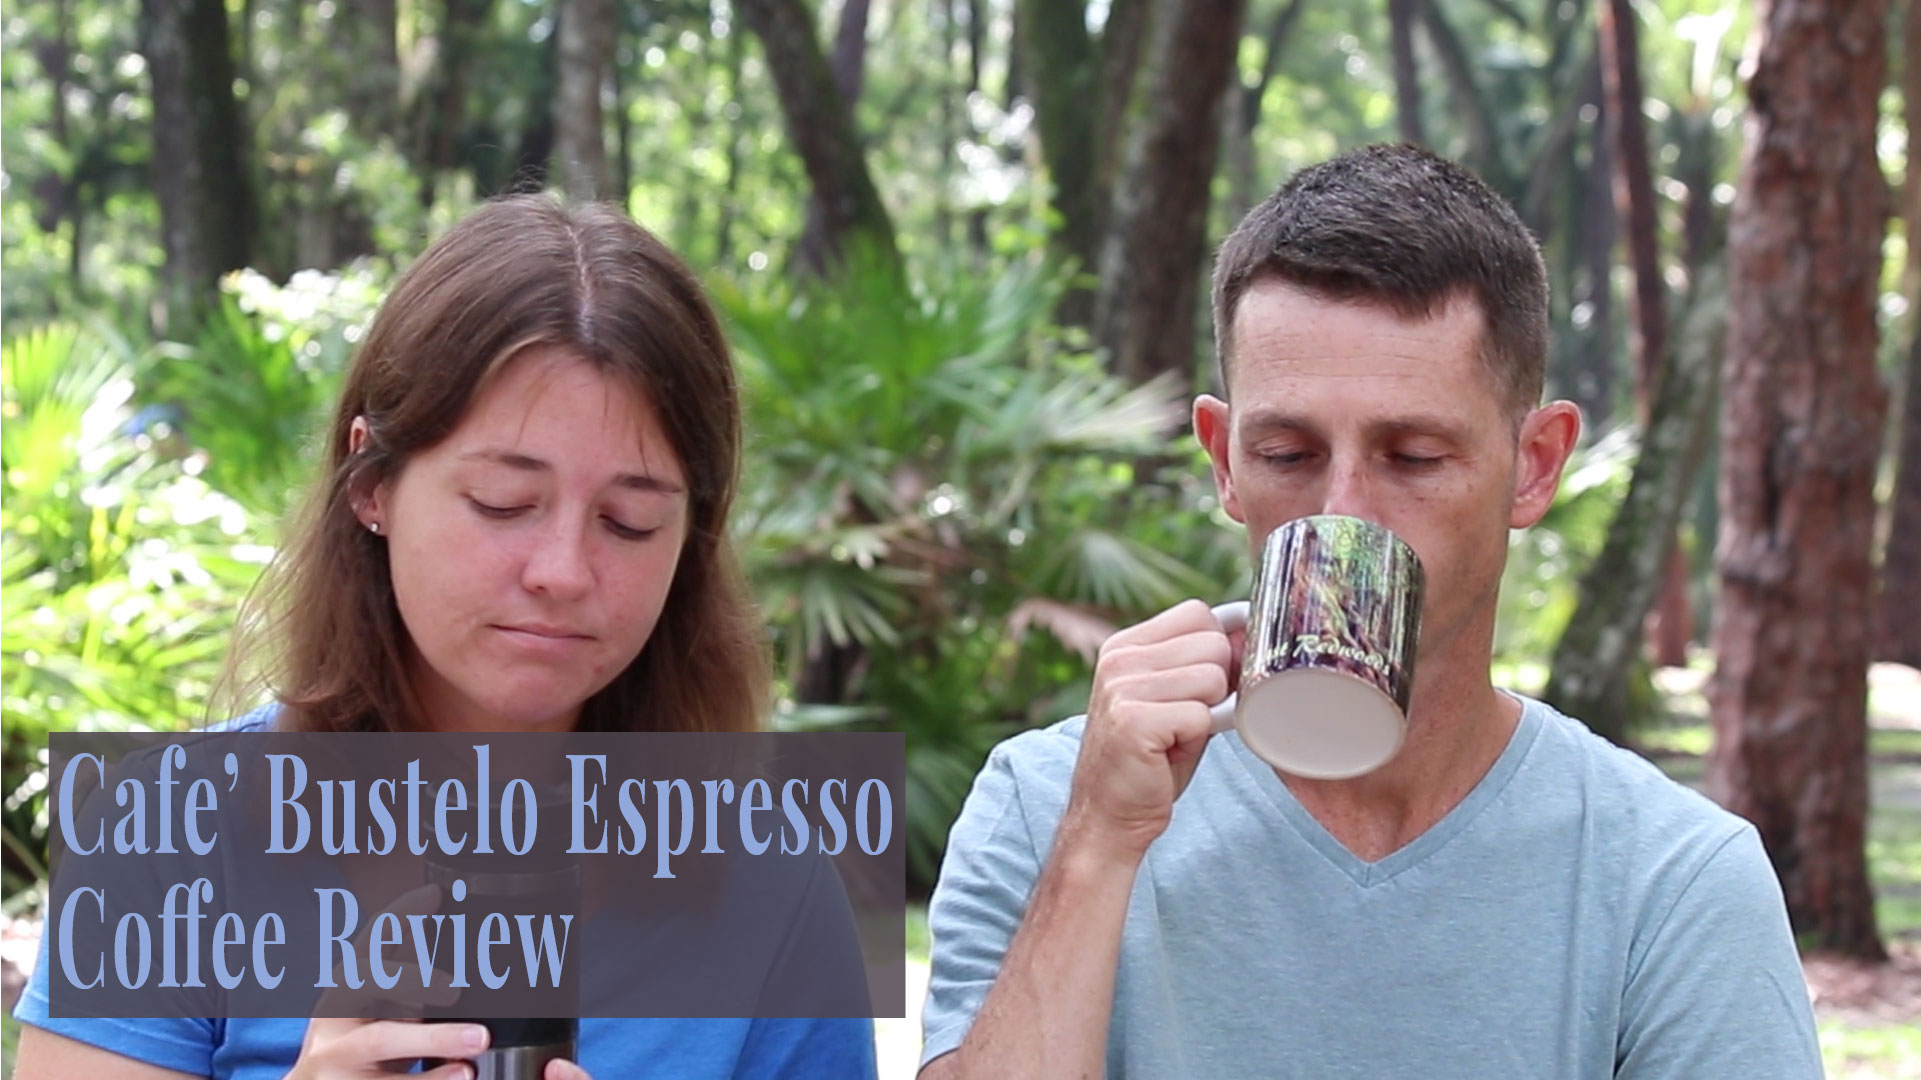 Video thumbnail for the review of Cafe Bustelo espresso coffee.